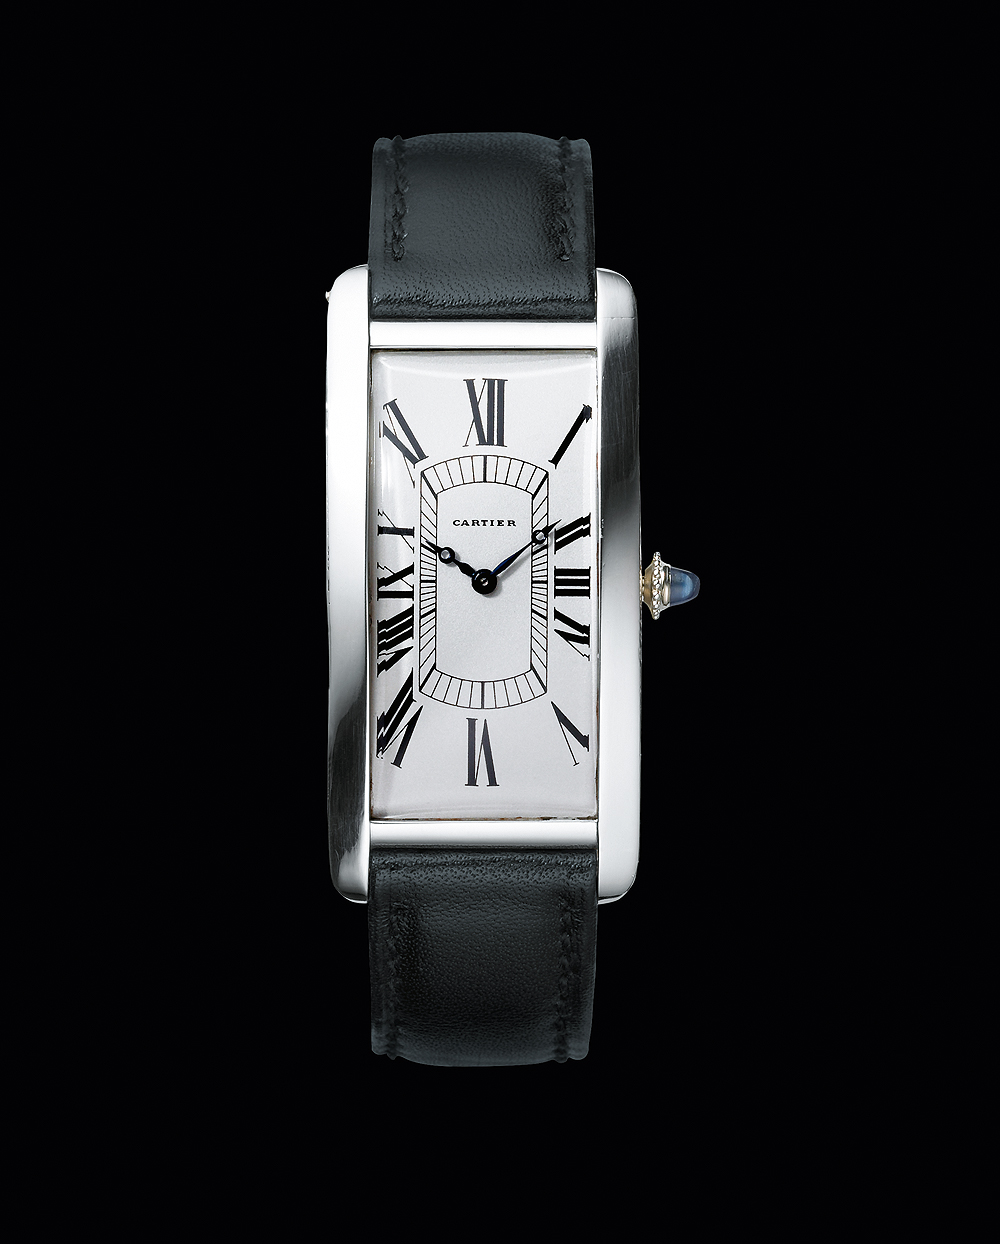 Wristwatches emerged as a genre in their own right during the Roaring ’20s, and Louis Cartier was among the trailblazers. He sketched his first Cartier Tank in 1917. The model was first produced in 1919 and it was given its elongated “cintrée” shape in 1921.